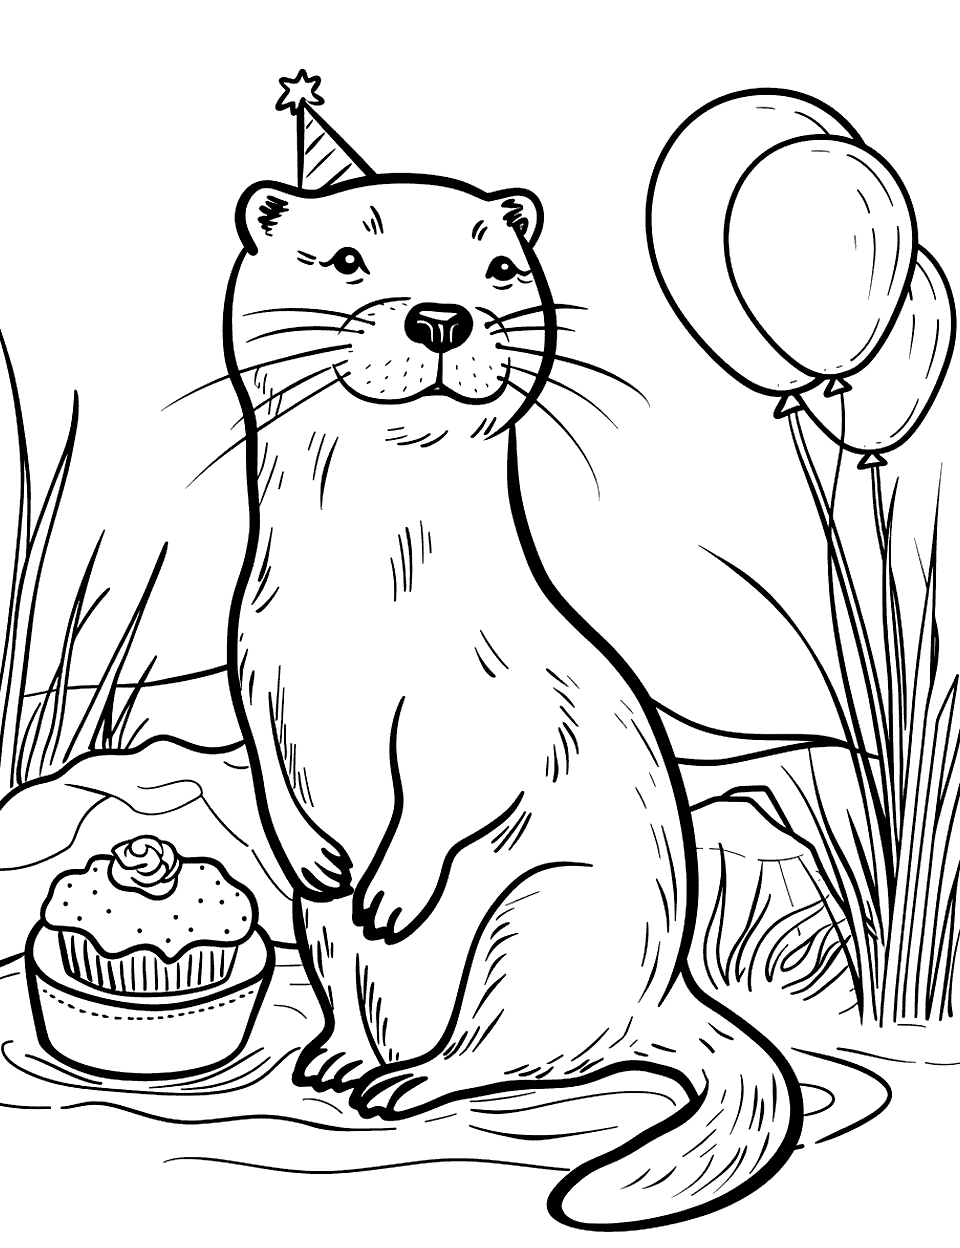 Otter Celebrating Birthday Coloring Page - A festive otter with a party hat, surrounded by balloons and a small cake.